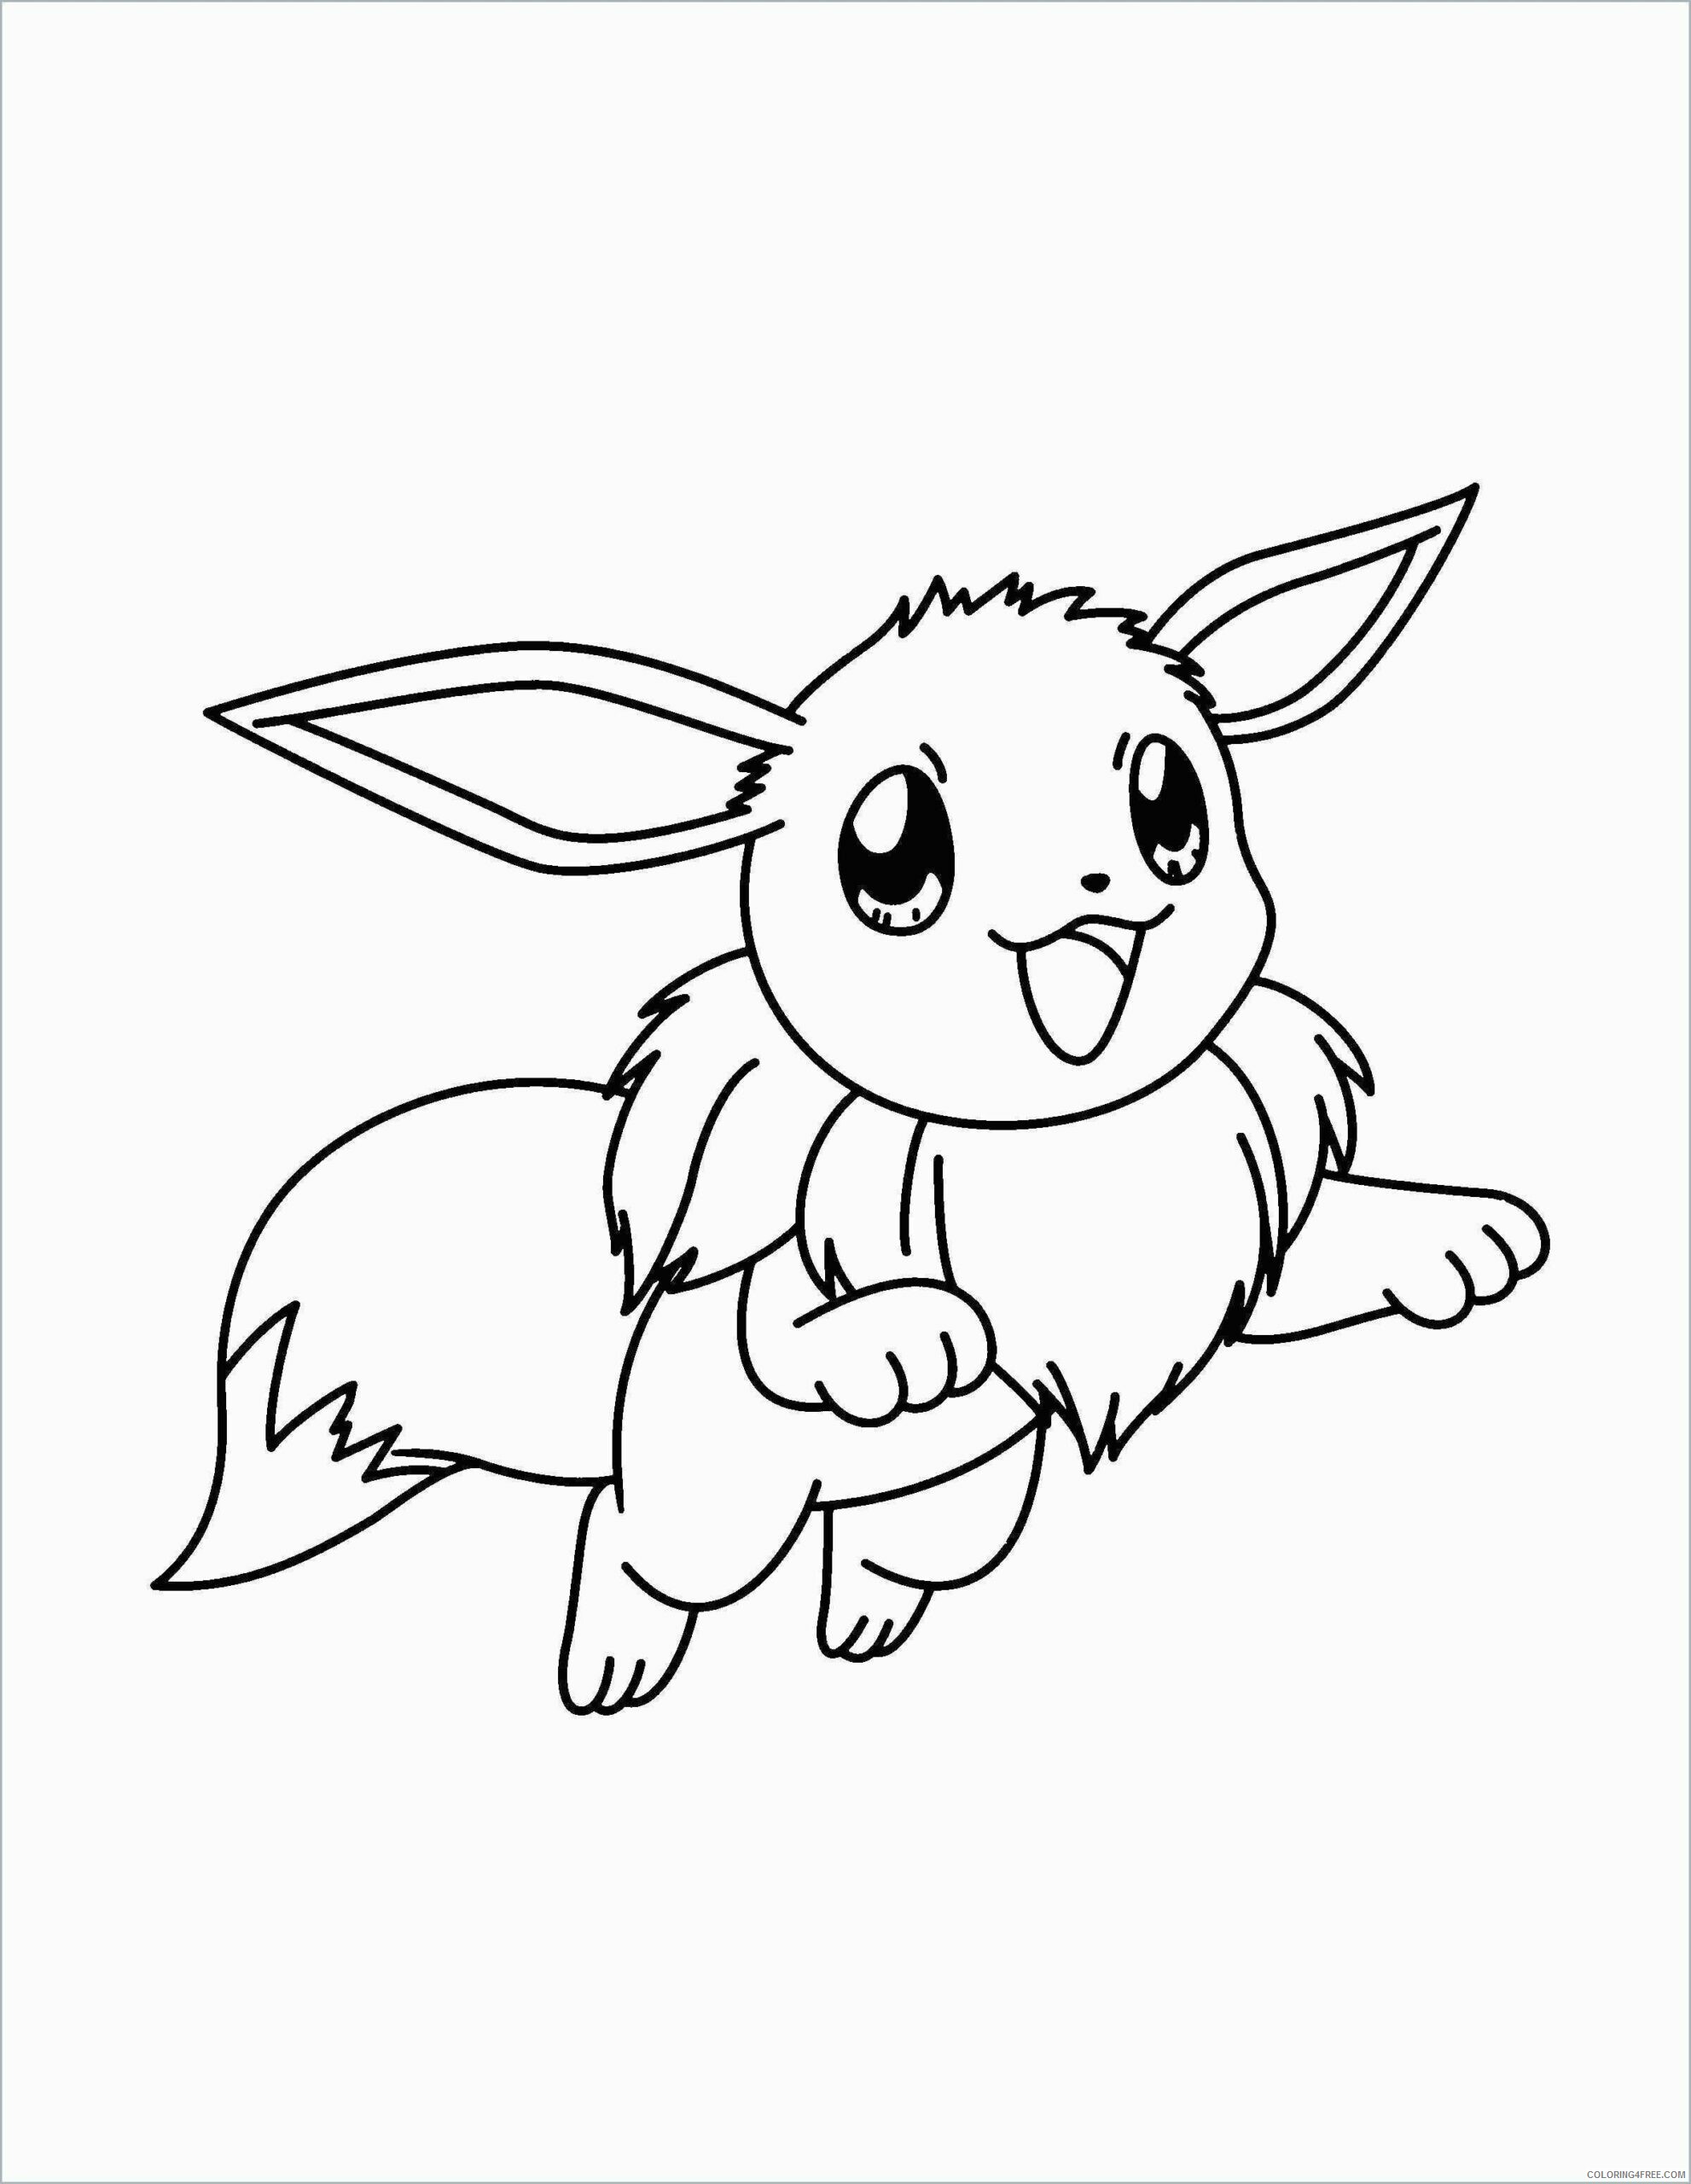 Eevee Pokemon Characters Printable Coloring Pages phenomenal photo inspirations pokemon 2021 032 Coloring4free